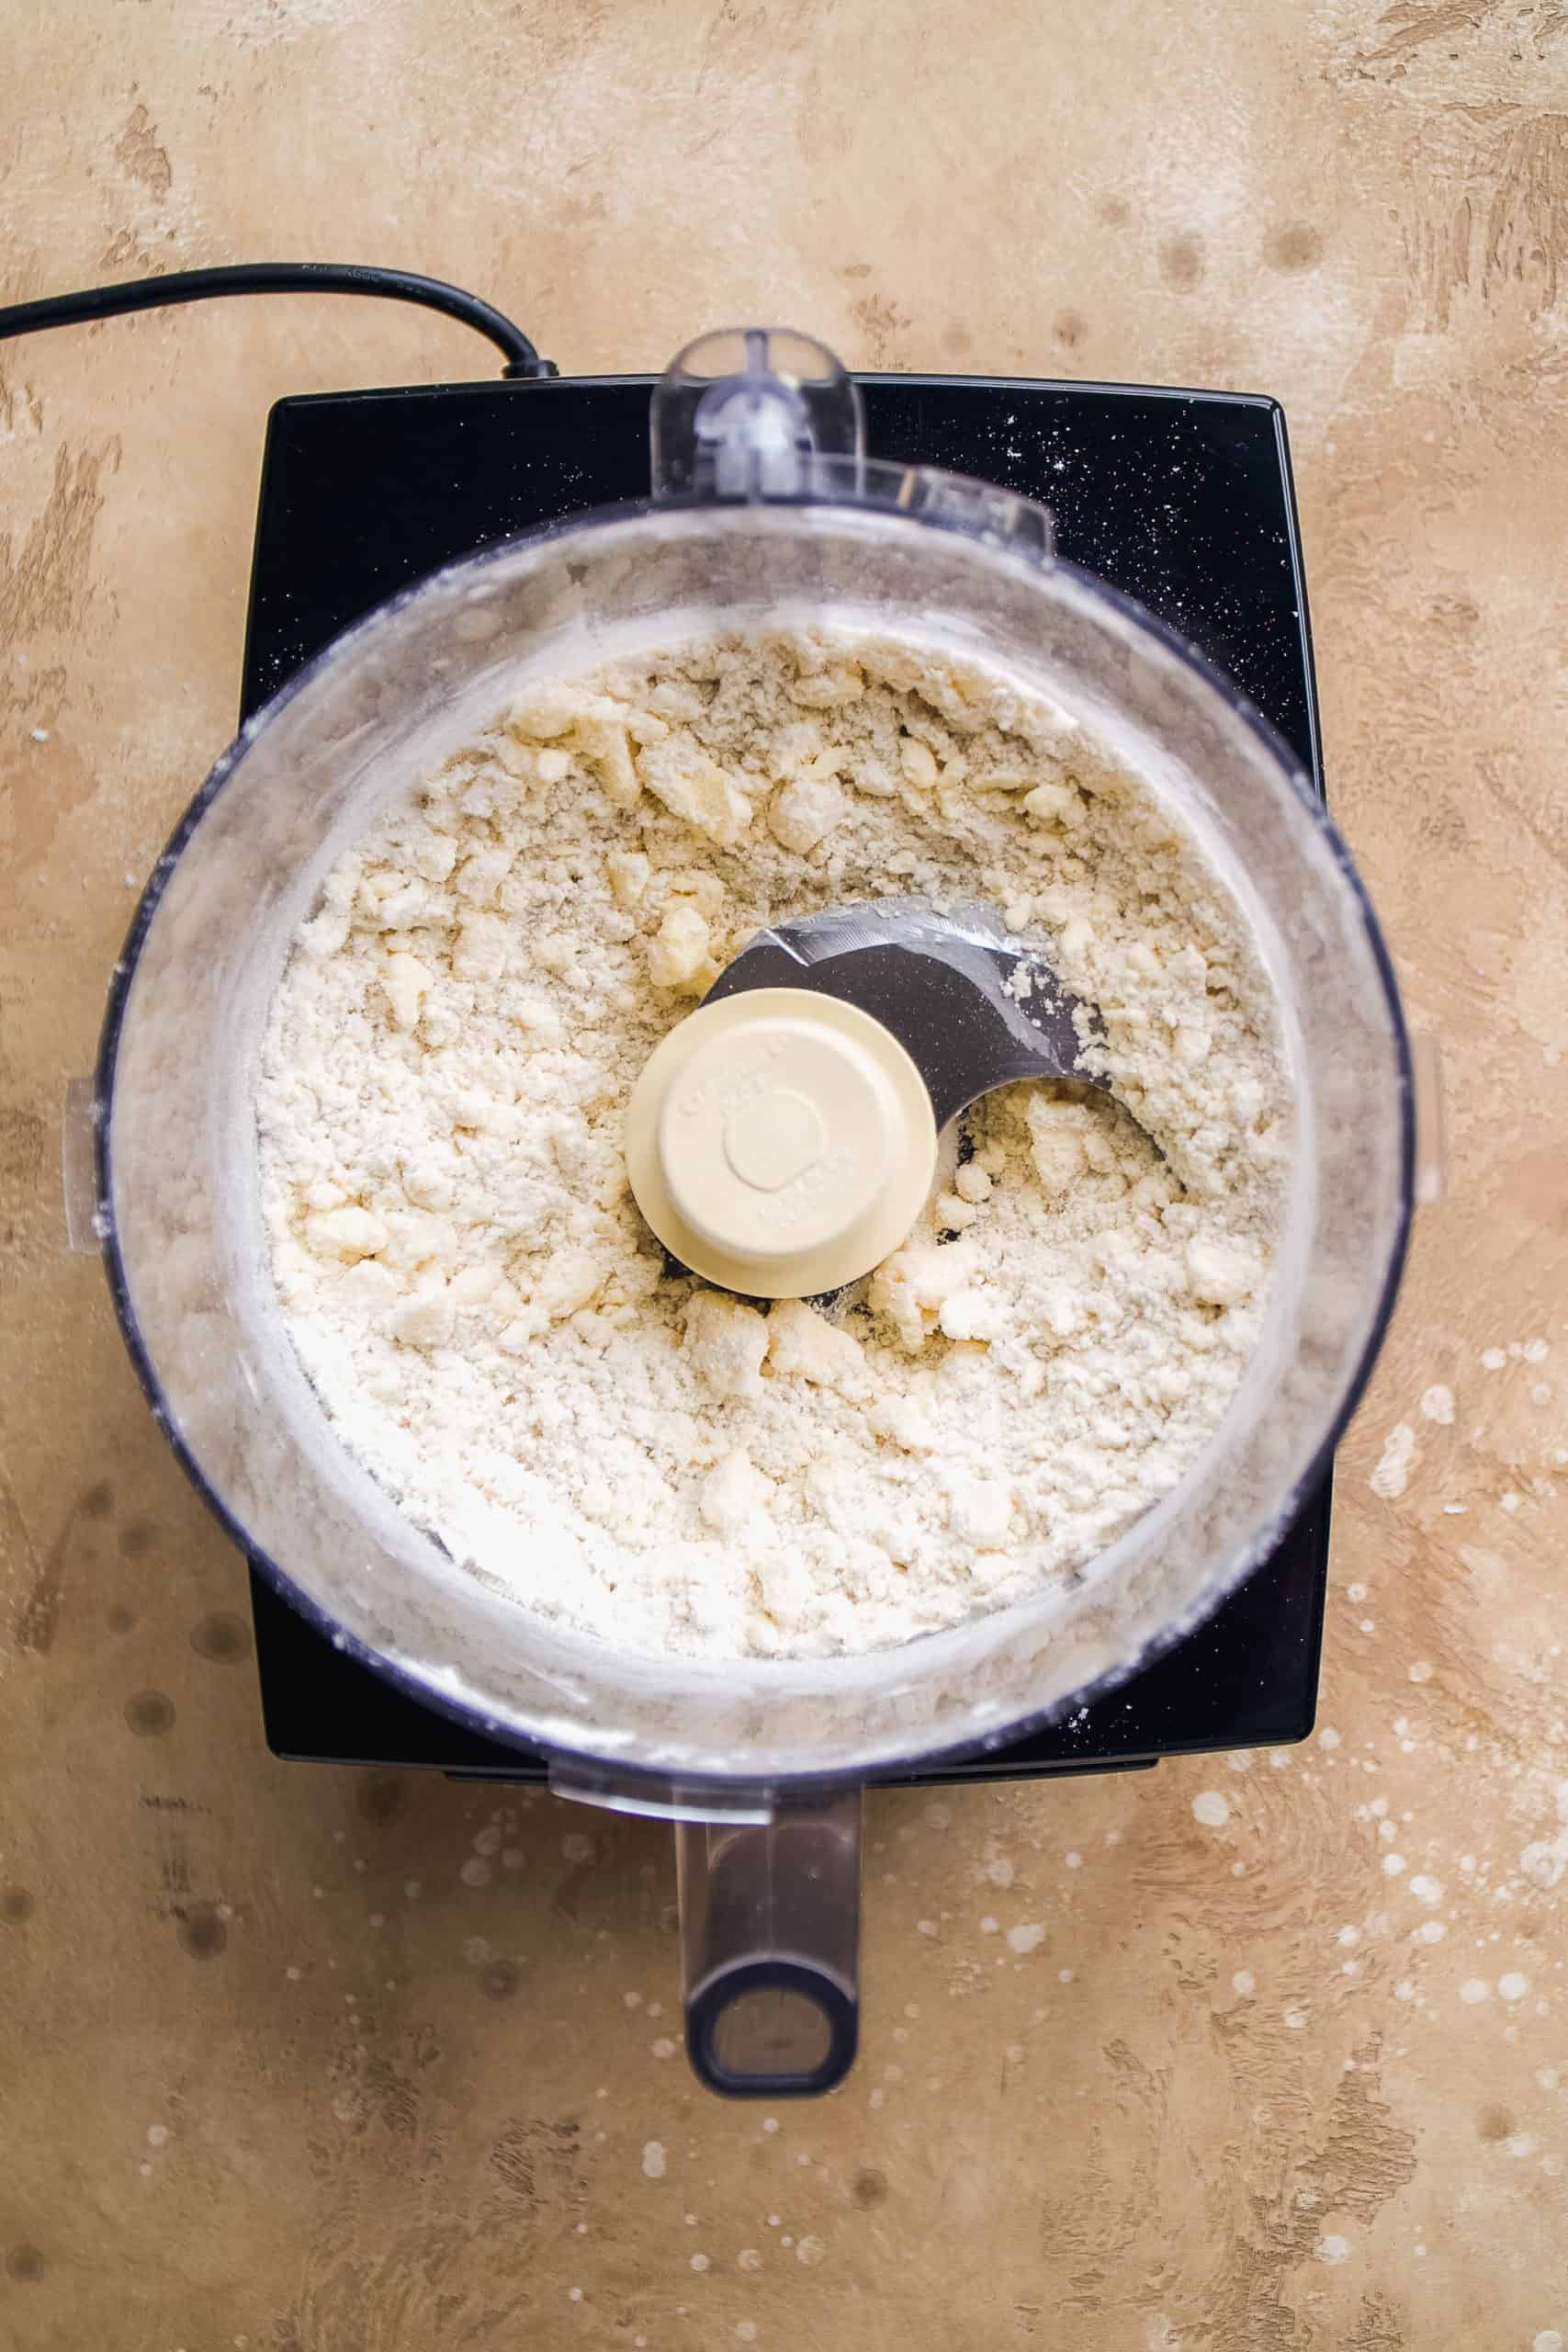 Overhead view of a food processor with gluten free dough being made.